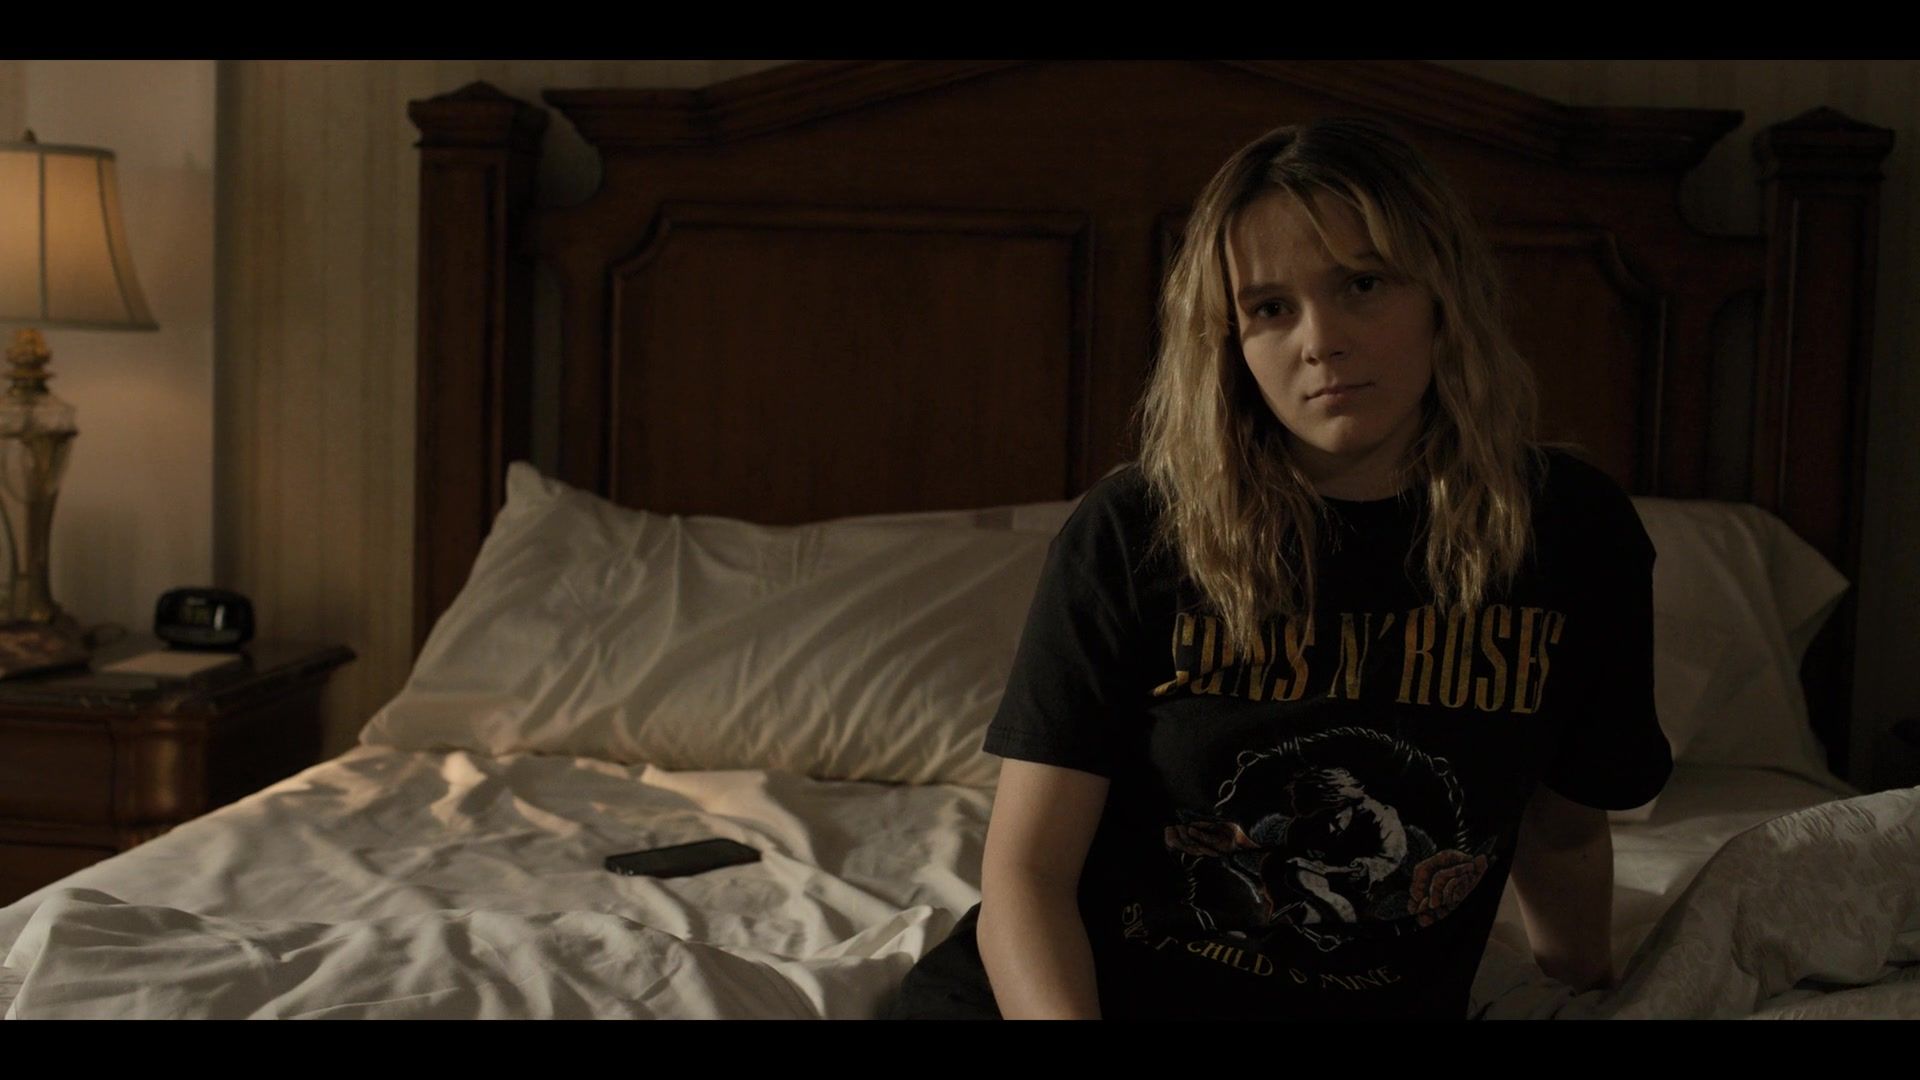 Worn on Justified: City Primeval TV Show - Guns N' Roses T-Shirt Worn by Vivian Olyphant as Willa Givens